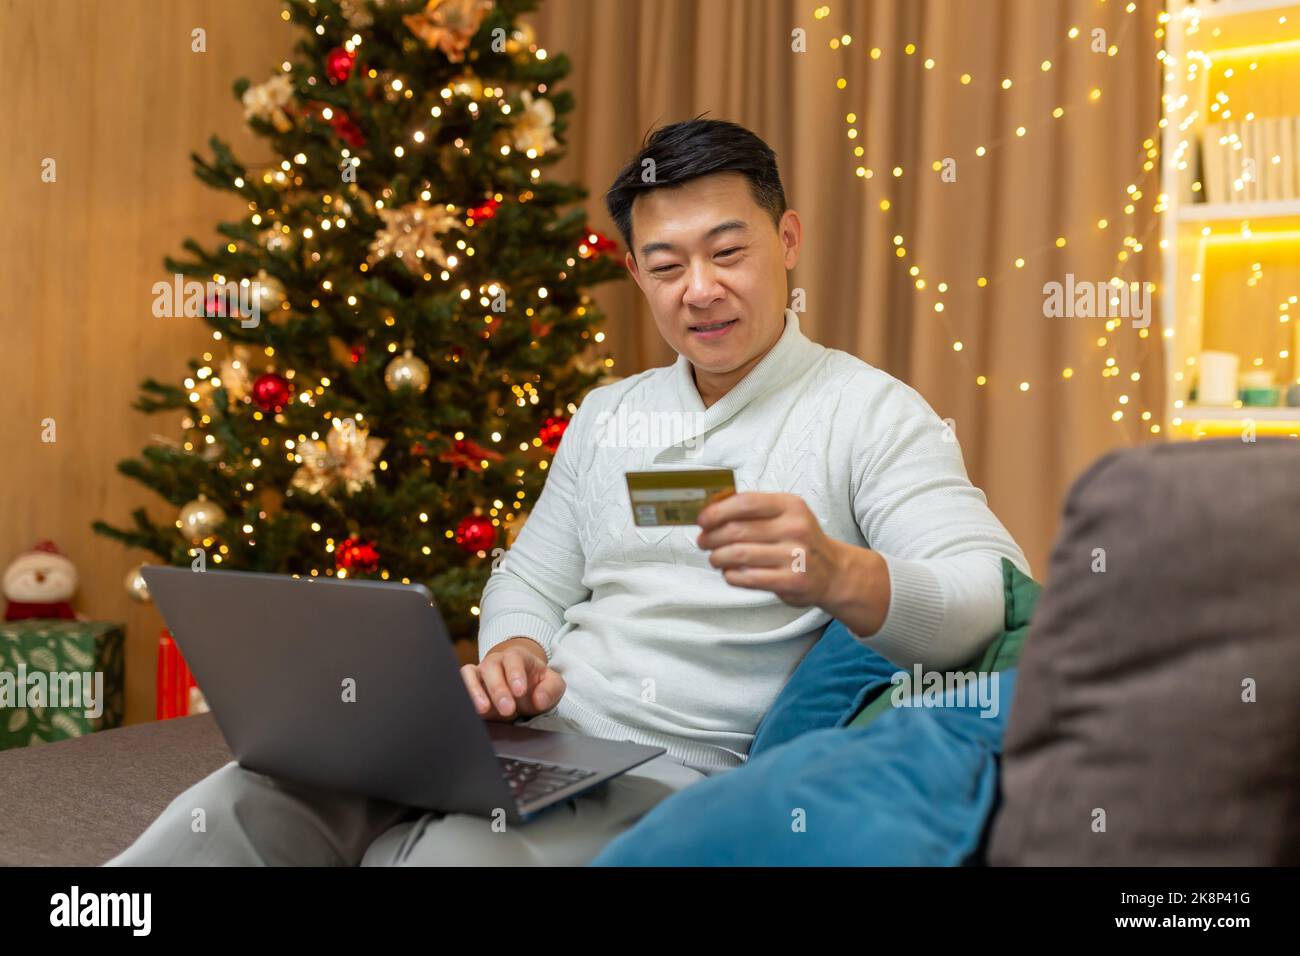 Successful businessman on christmas at home sitting on sofa in living room, using laptop online shopping, asian celebrating new year near tree, choosing gifts in online store shopping credit card. Stock Photo